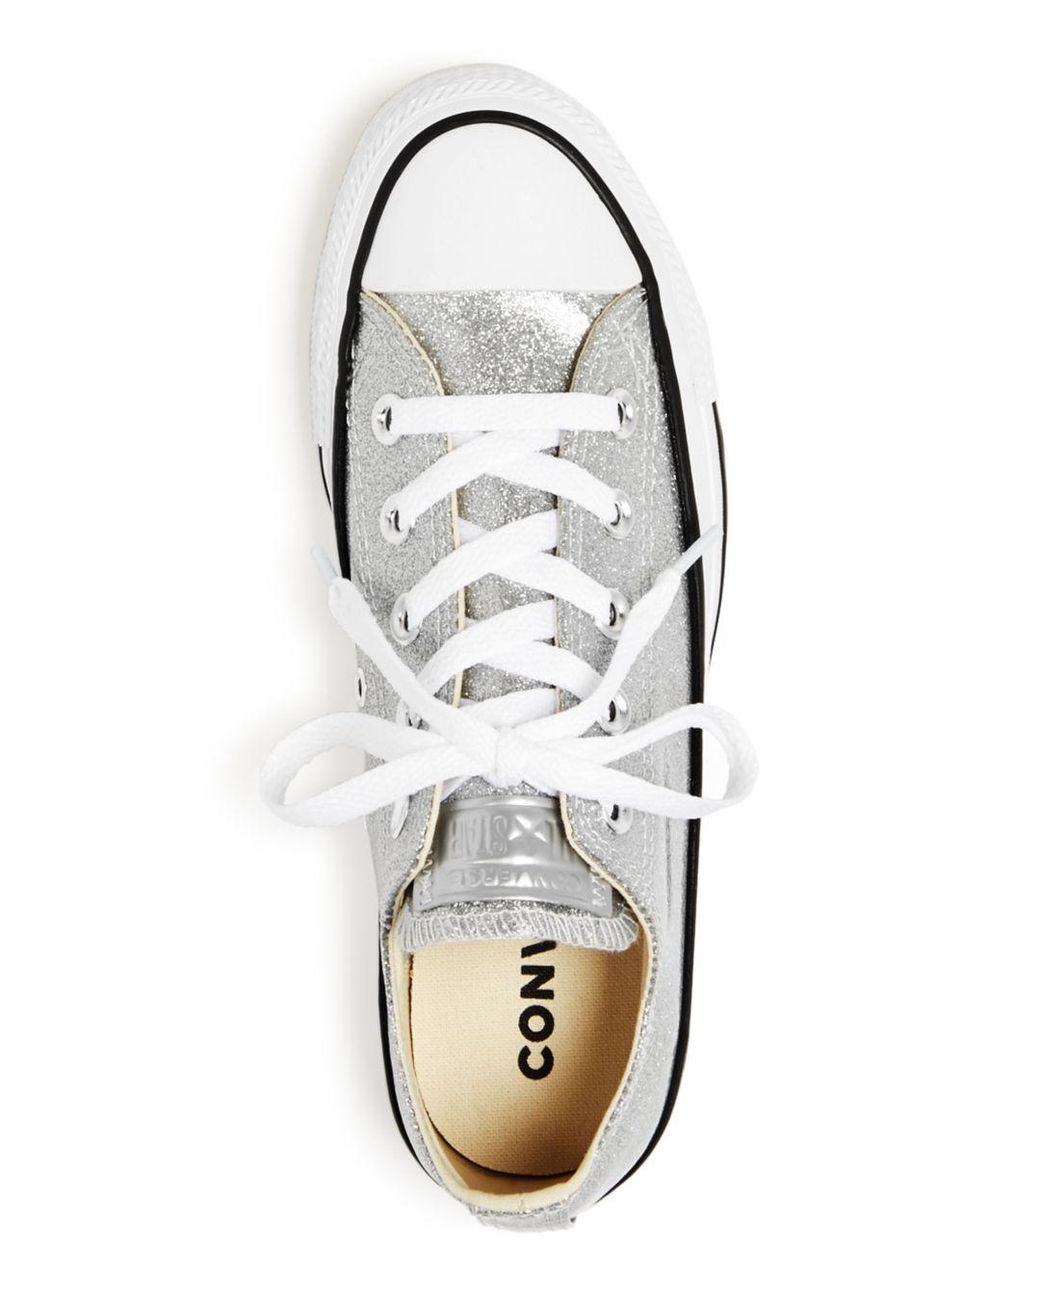 Converse Women's Chuck Taylor All Star Glitter Low-top Sneakers in White |  Lyst